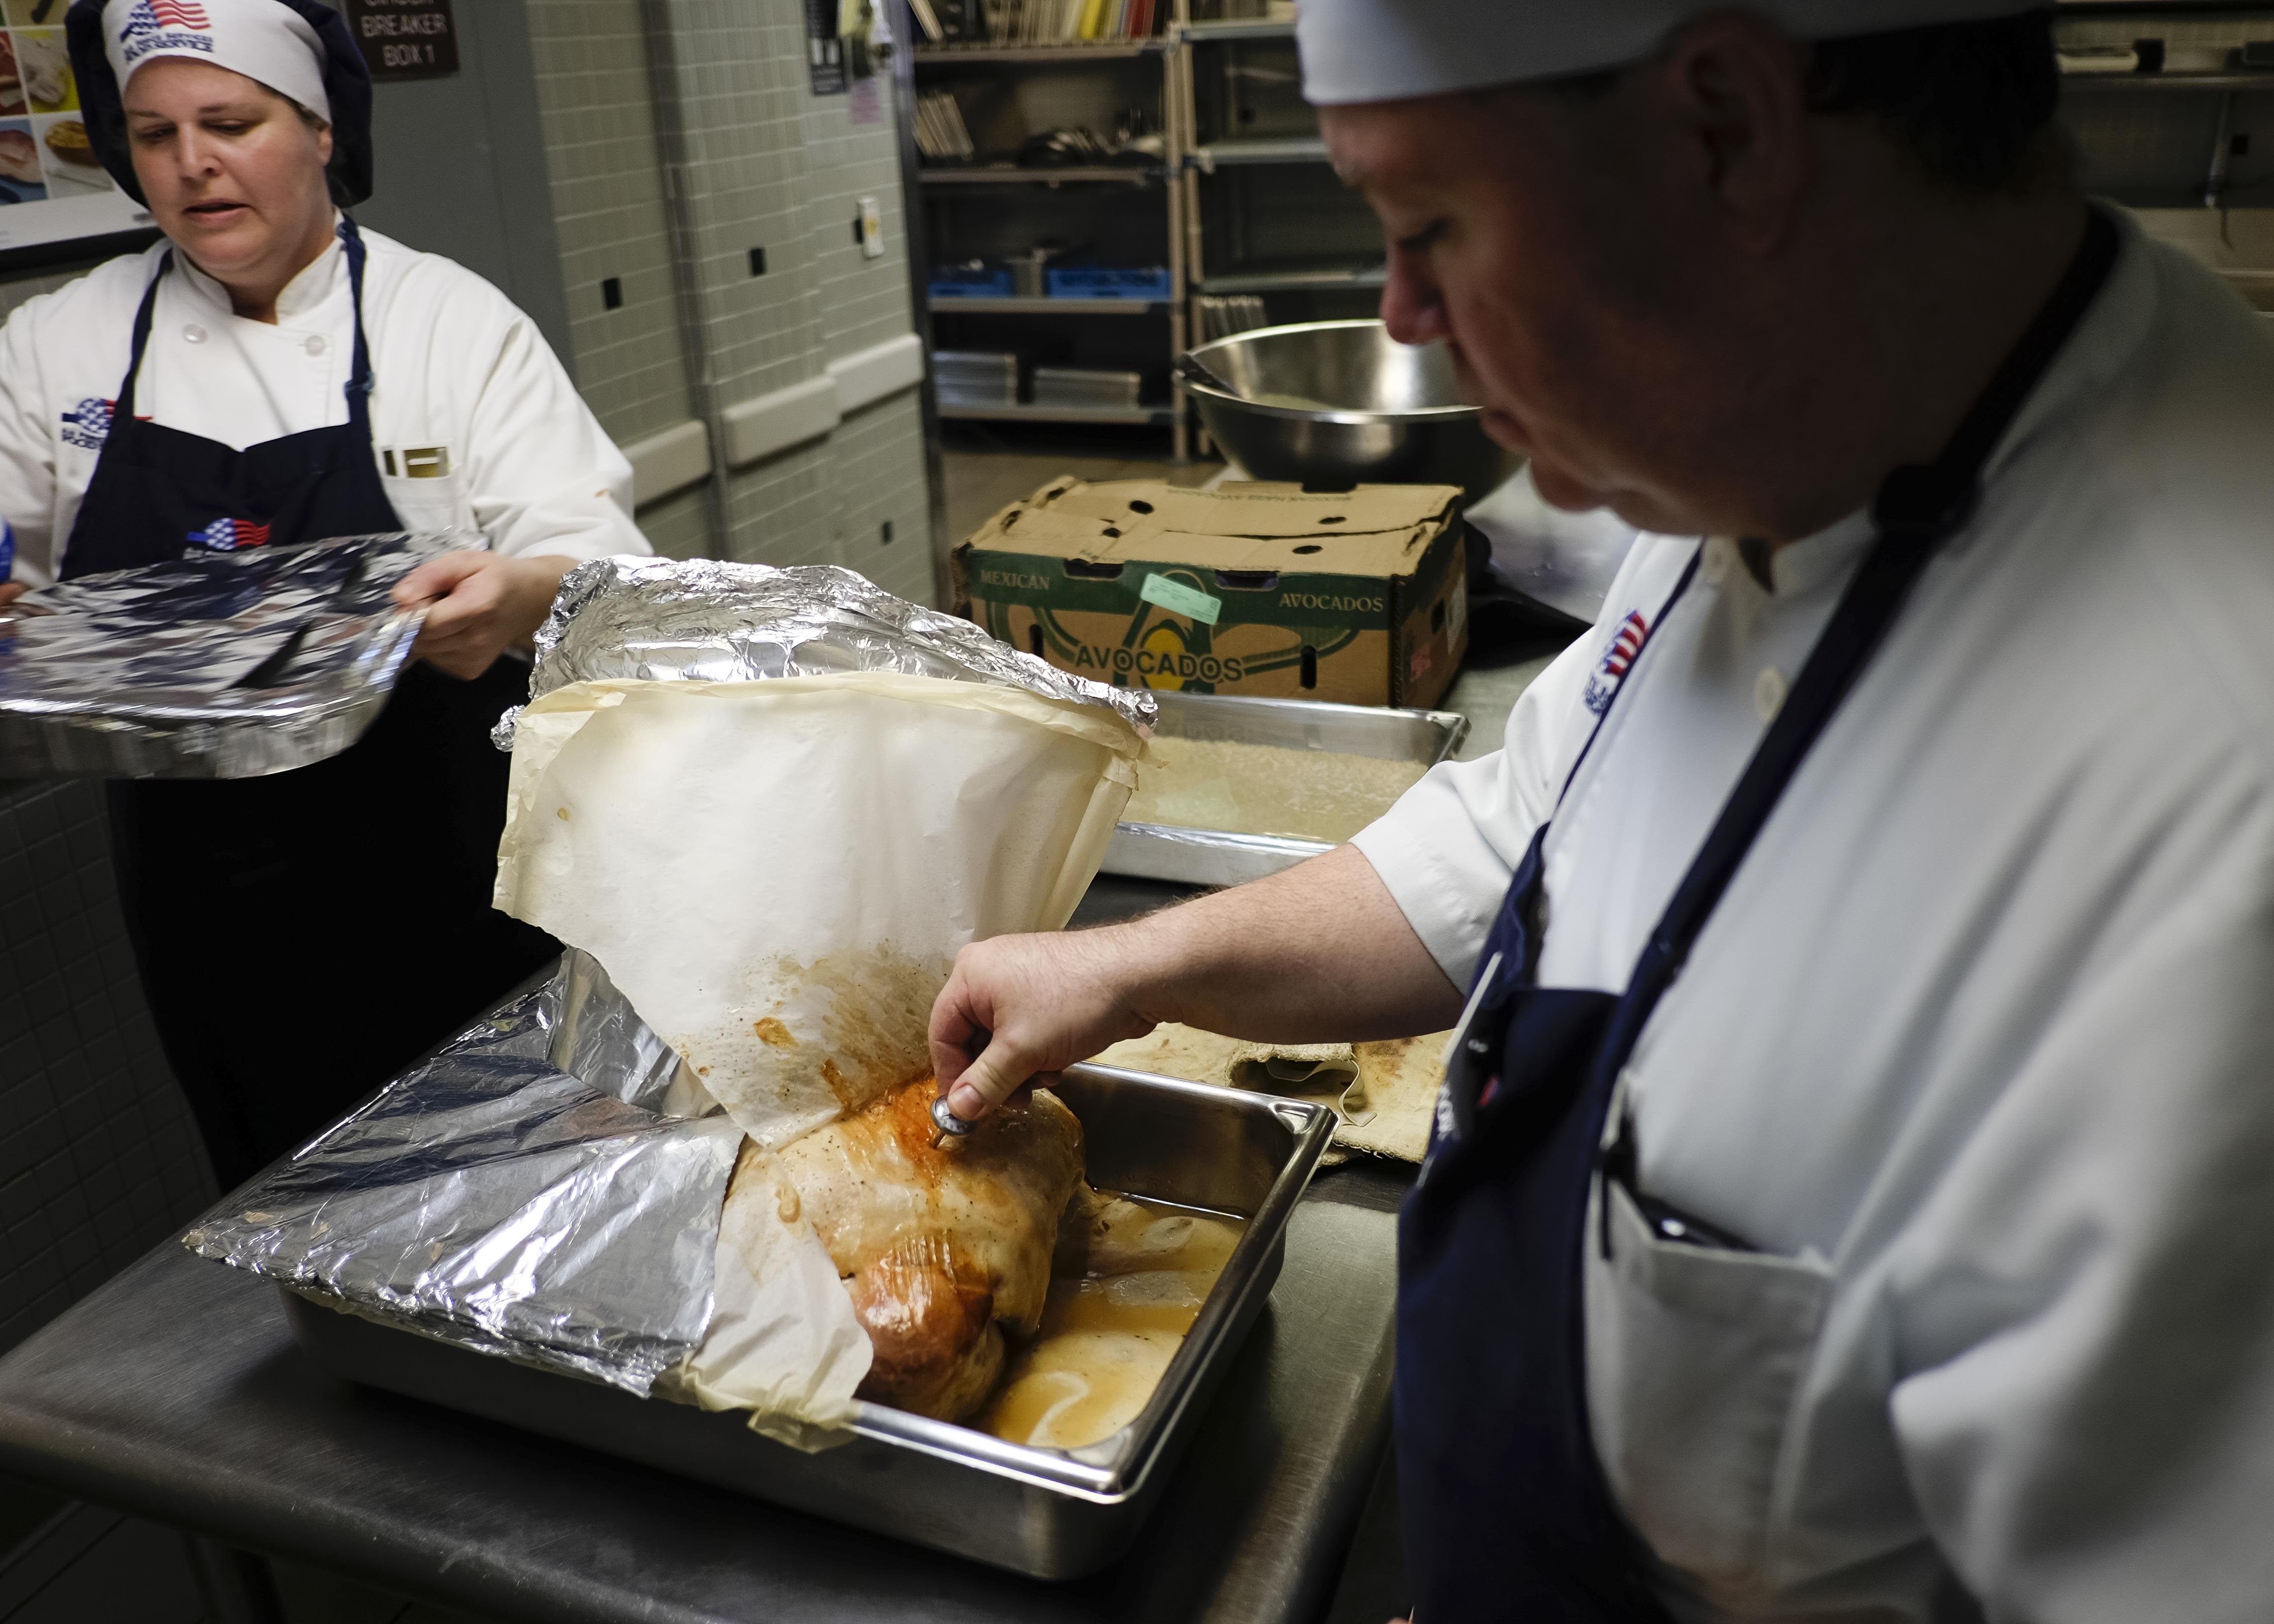 Reef dining facility to host Thanksgiving lunch